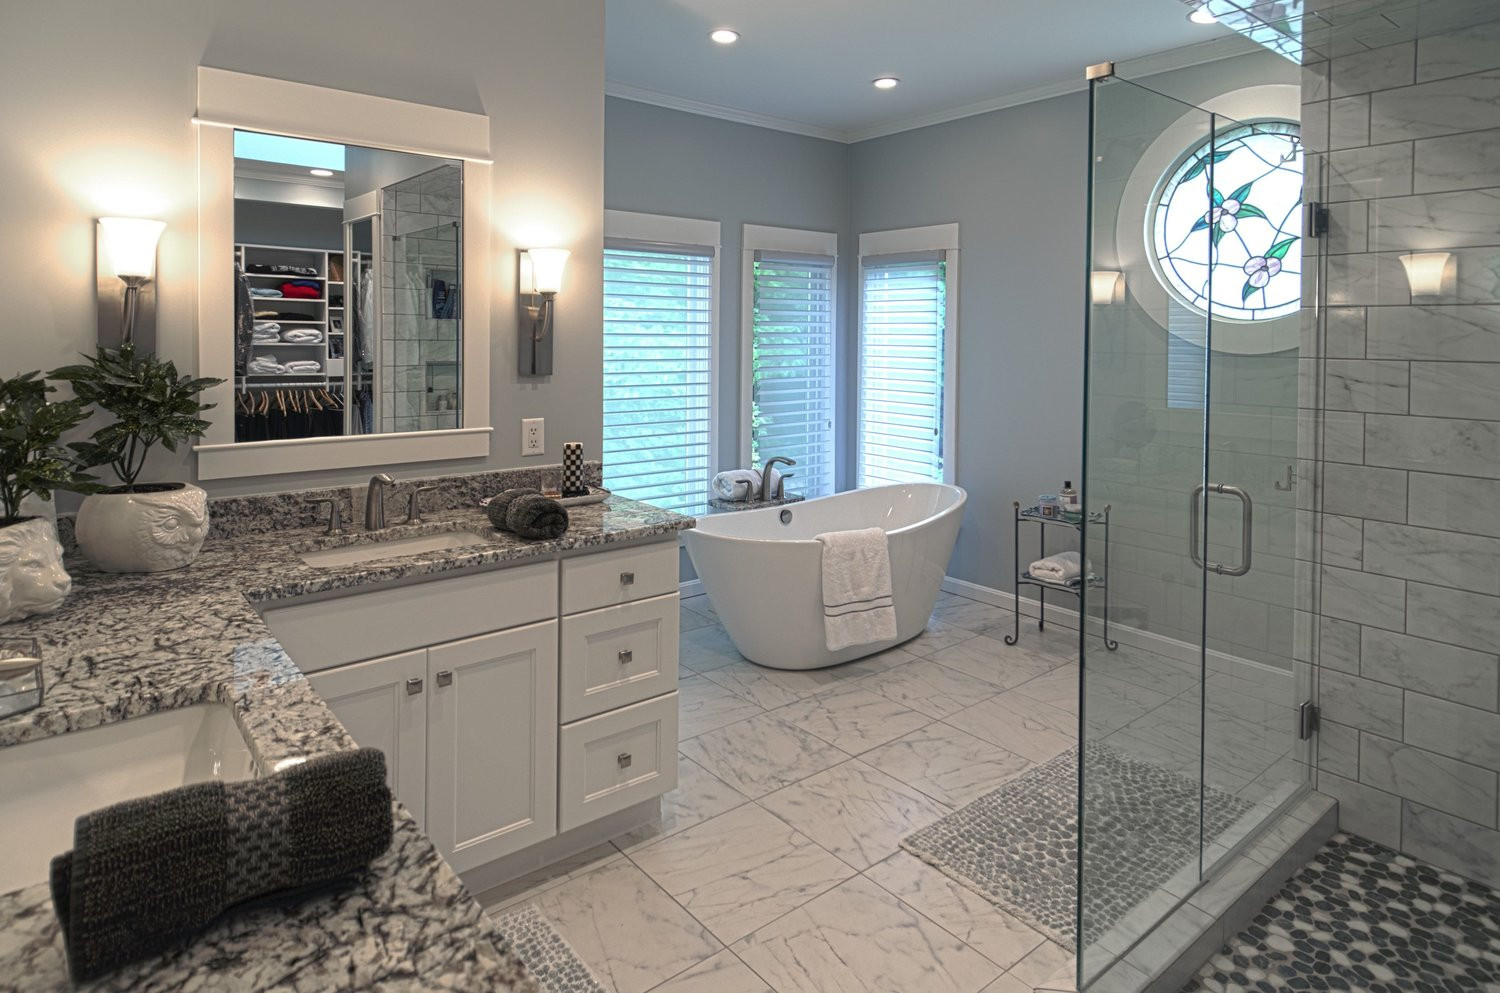 Cost Of Remodeling A Bathroom
 How Much Does Bathroom Remodel Cost in In Los Angeles